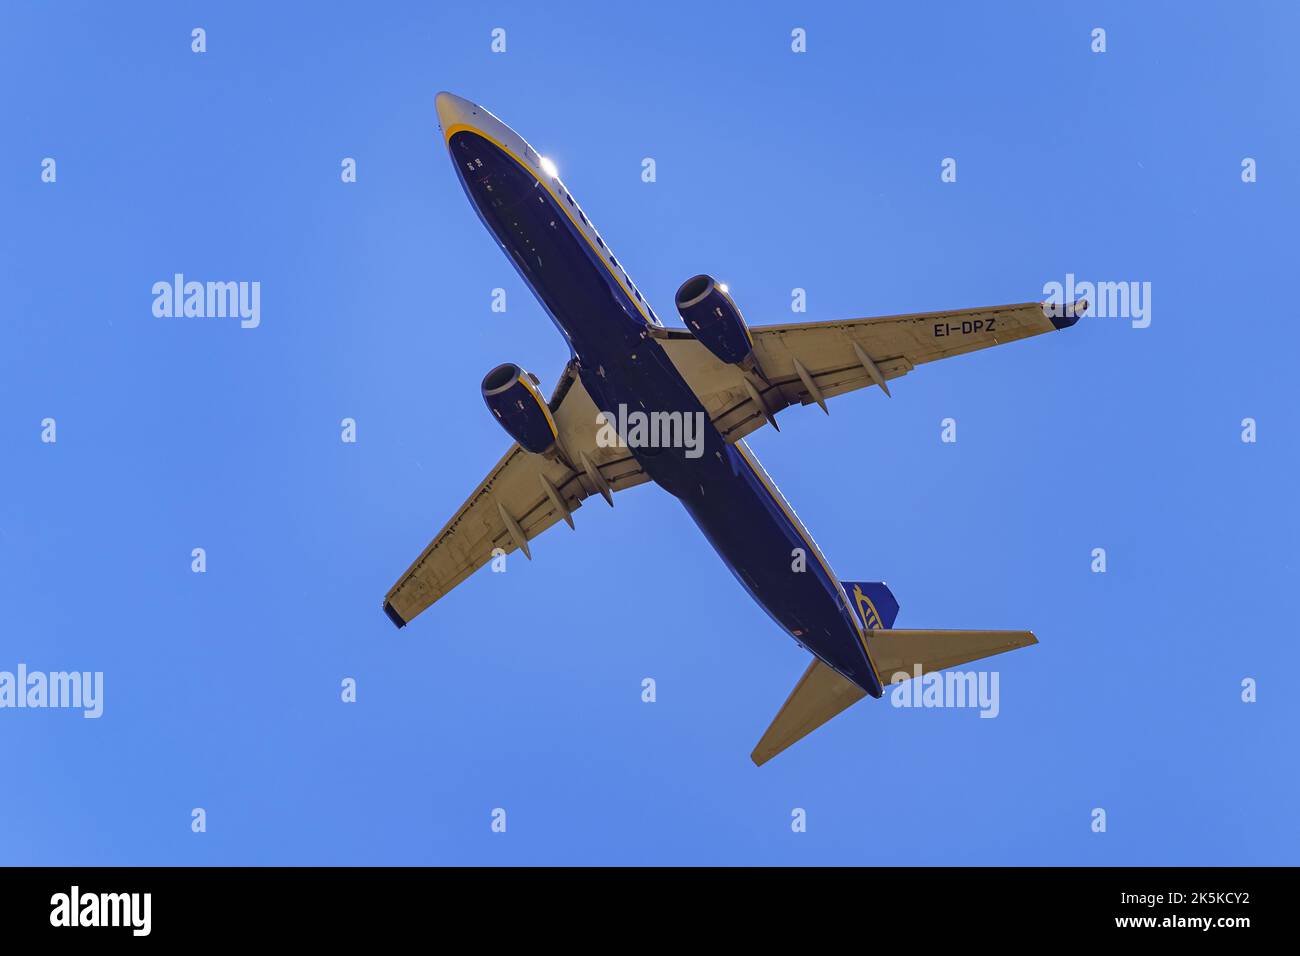 Madrid, Spain, October 30, 2022: Large plane of the Ryanair airline seen from below and flying over the city. Stock Photo